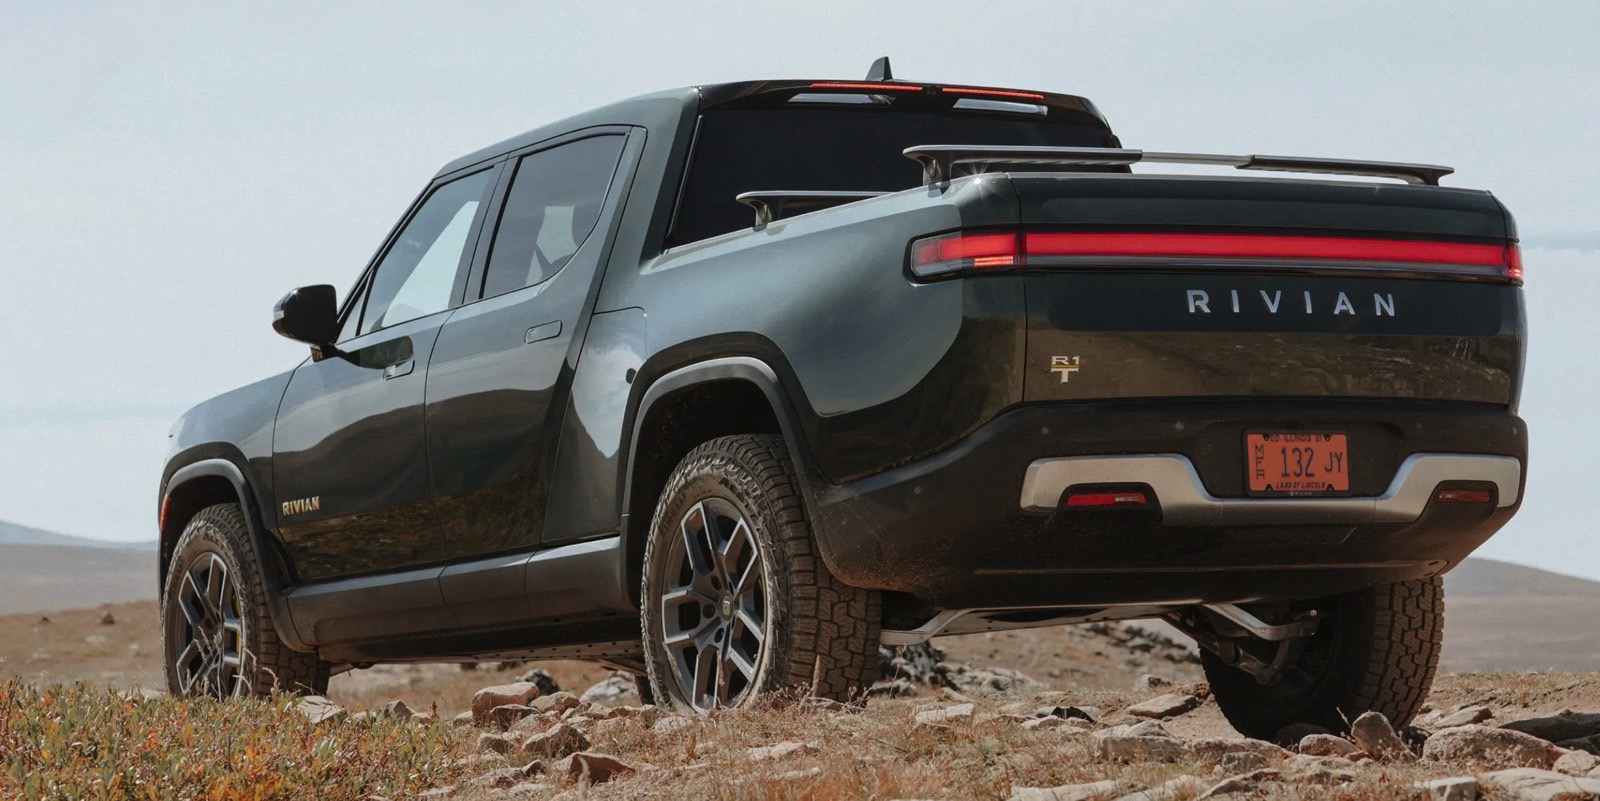 Rivian says it plans to deliver ‘thousands’ of R1T trucks over the next four months